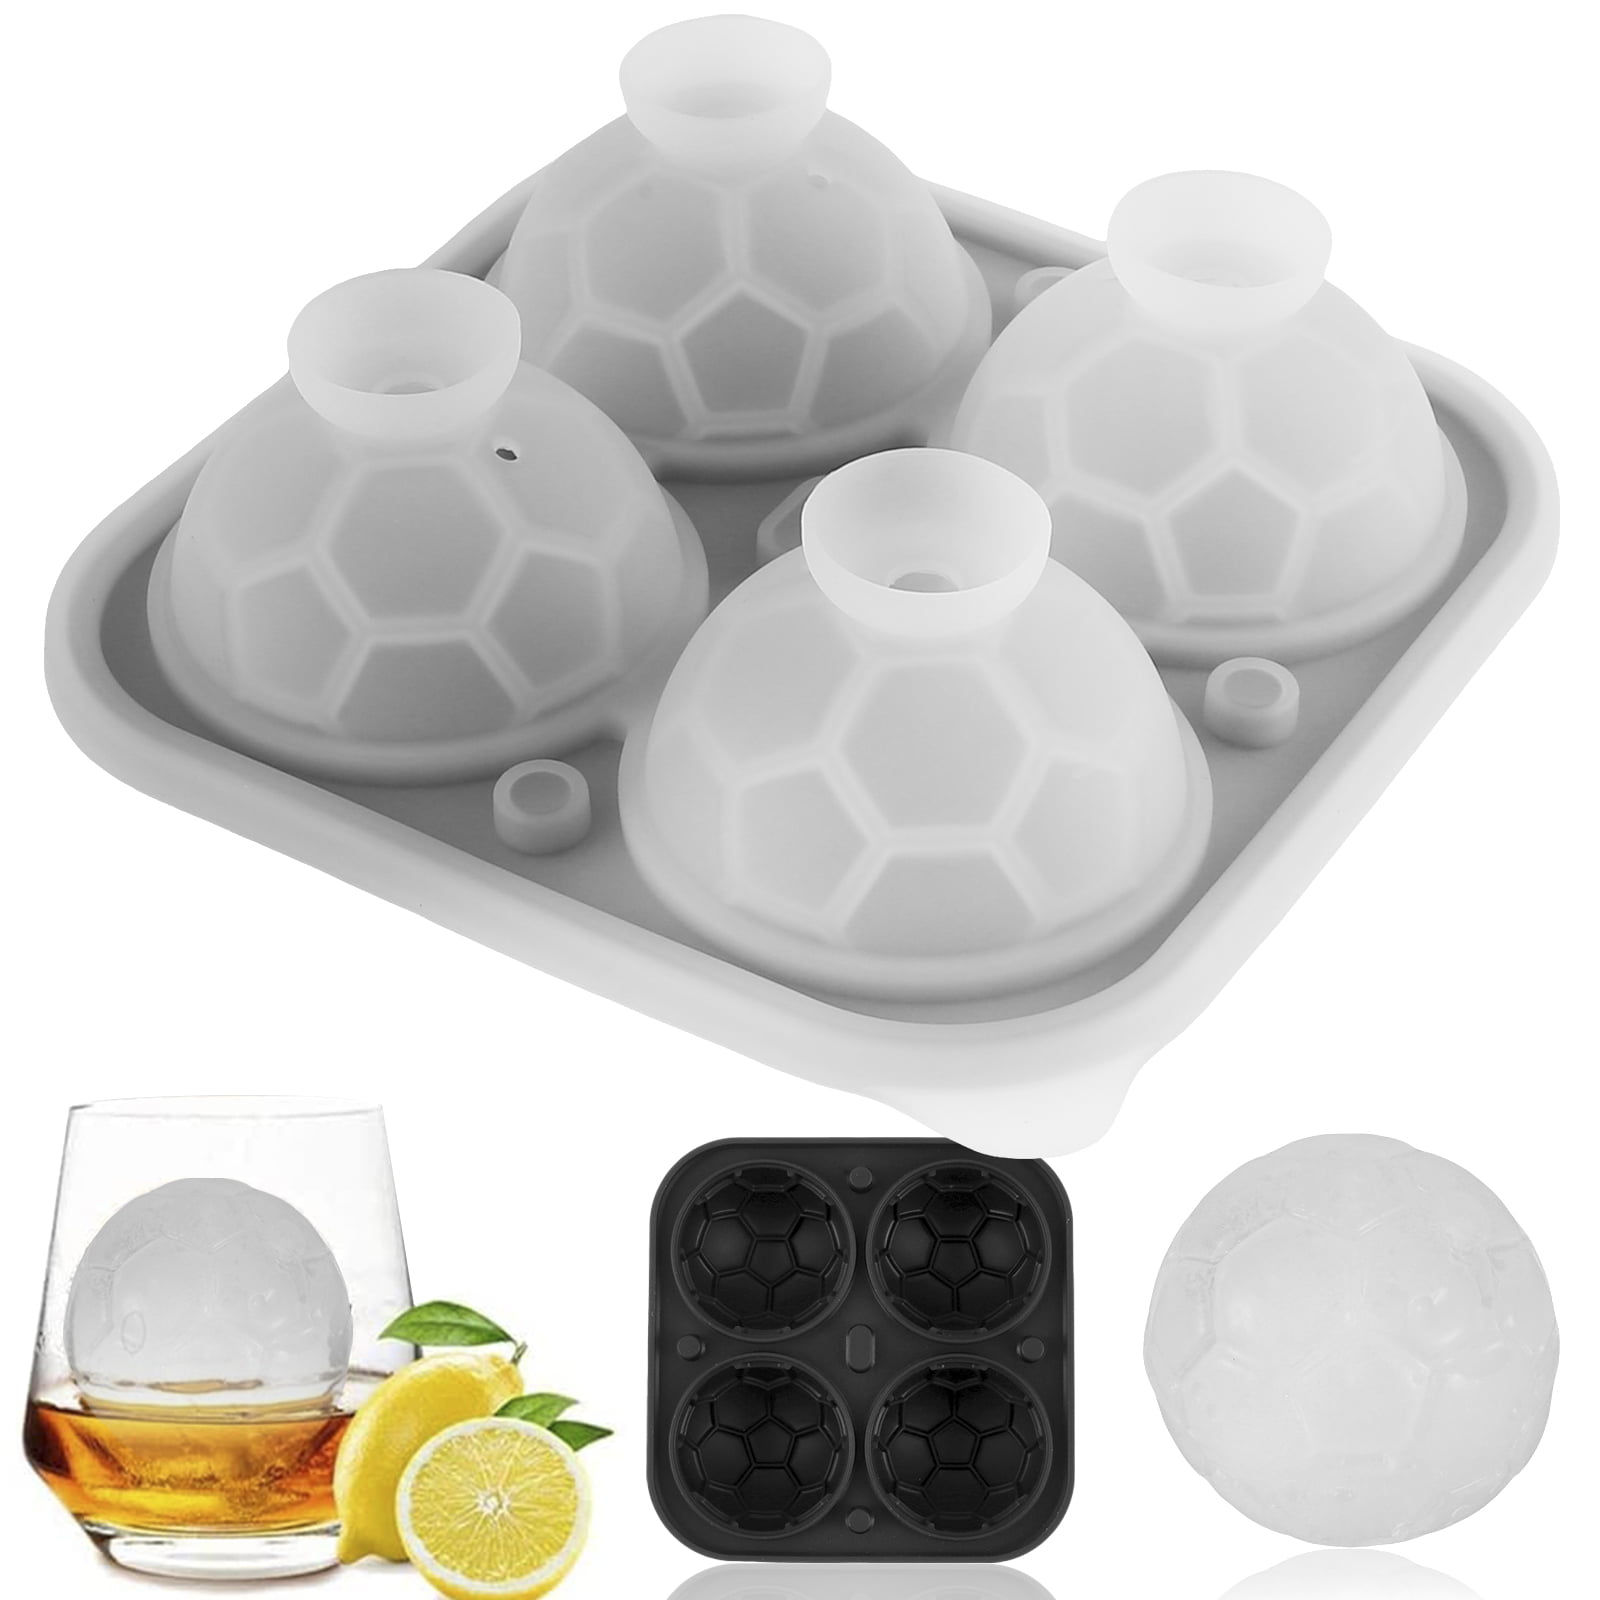 Chillz Extreme Ice Ball Mold Tray - Makes 4 x 2.5 inch Ice Balls (1 Pa –  The Classic Kitchen